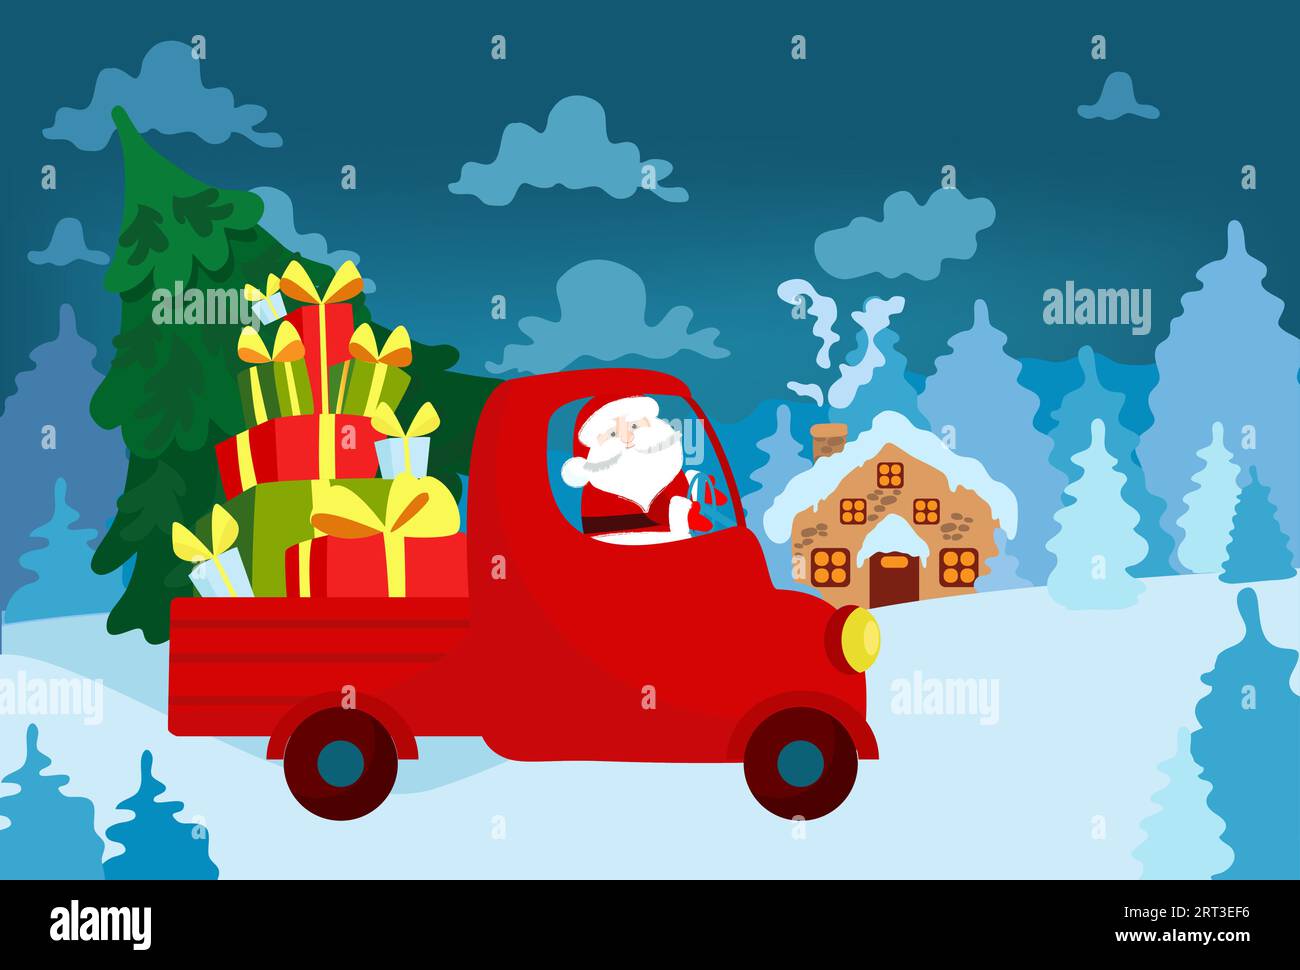 Santa Claus is carrying a fir tree and gifts in a truck against the backdrop of a winter fairy-tale landscape. Fir trees, clouds. Stock Vector